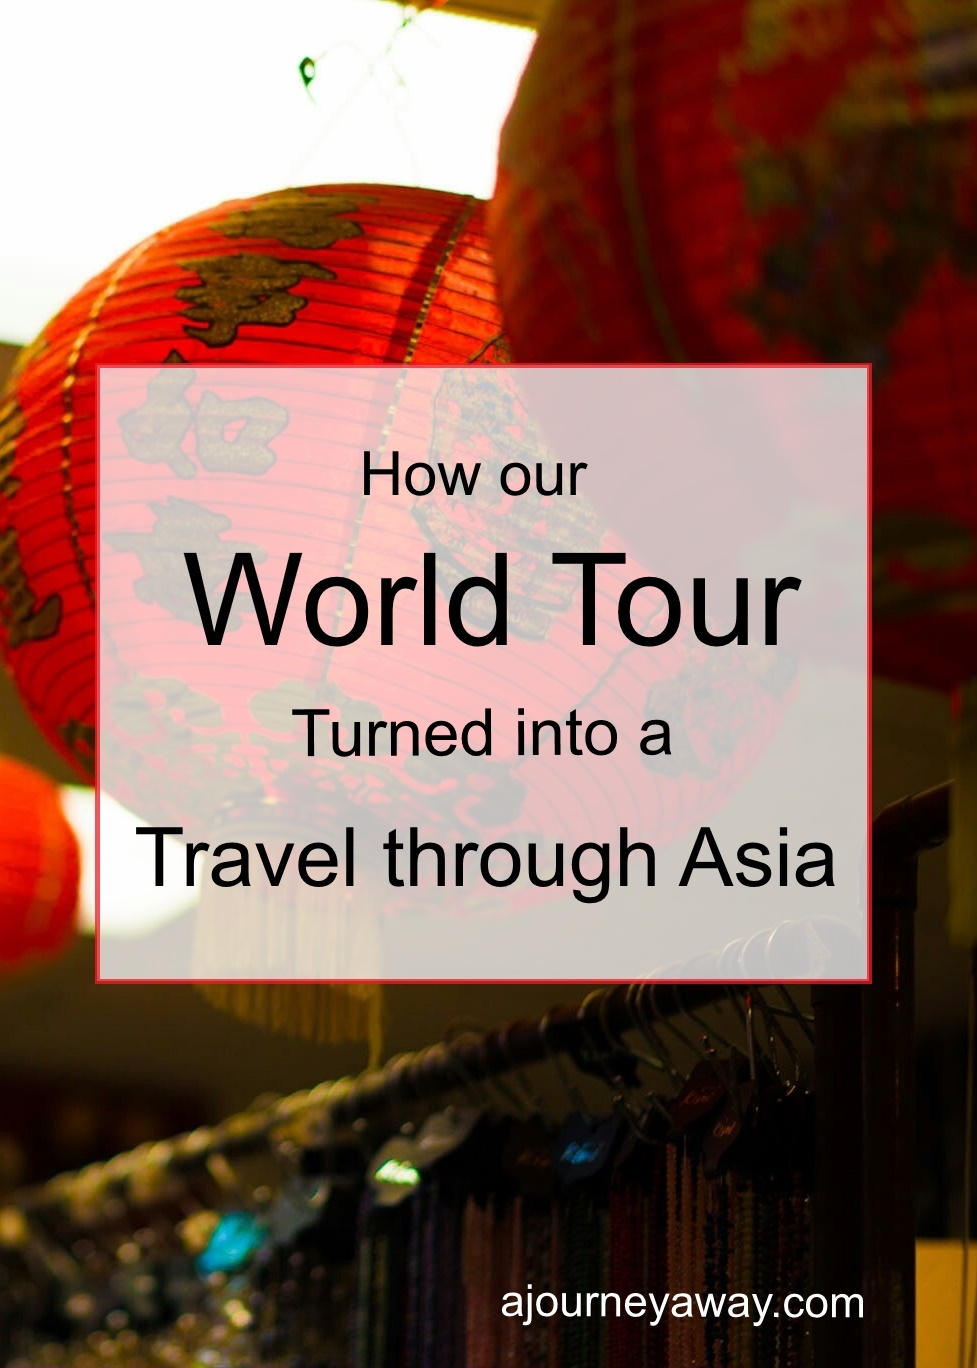 Unexpected travel events: how our world tour turned into a travel through Asia